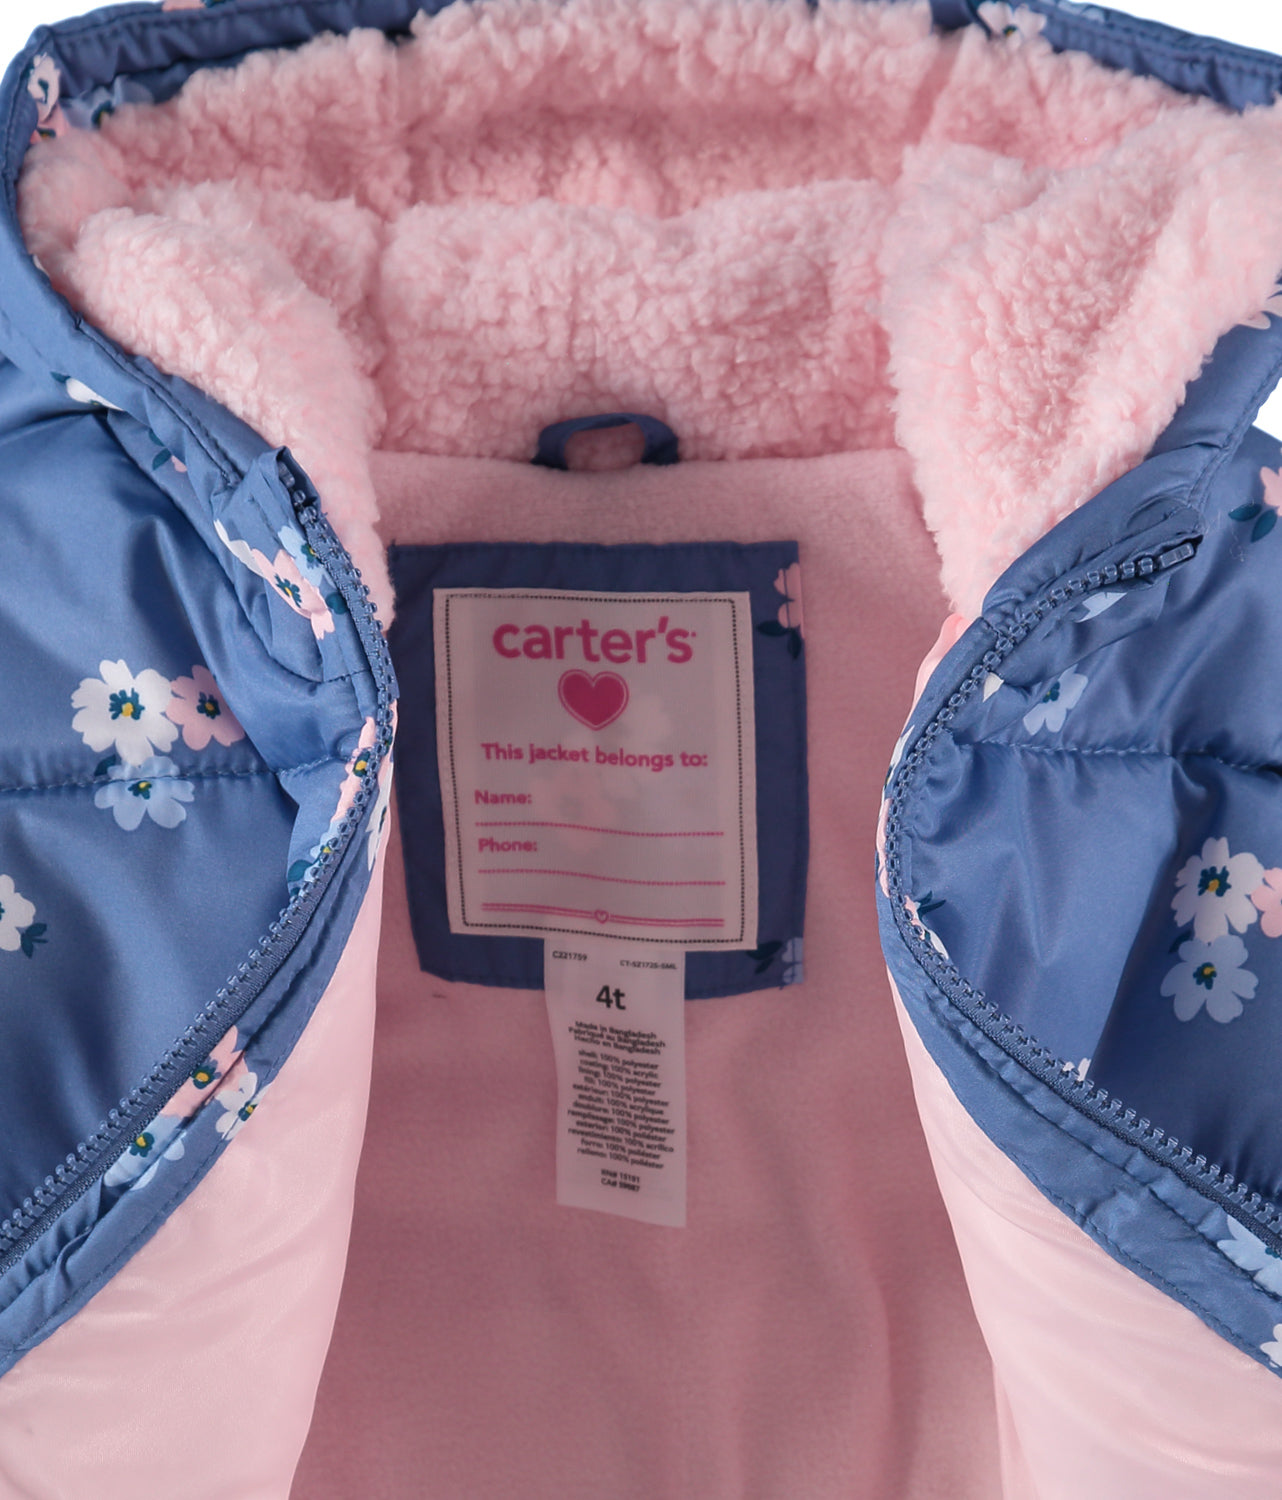 Carters Girls 2T-4T Floral Puffer Jacket